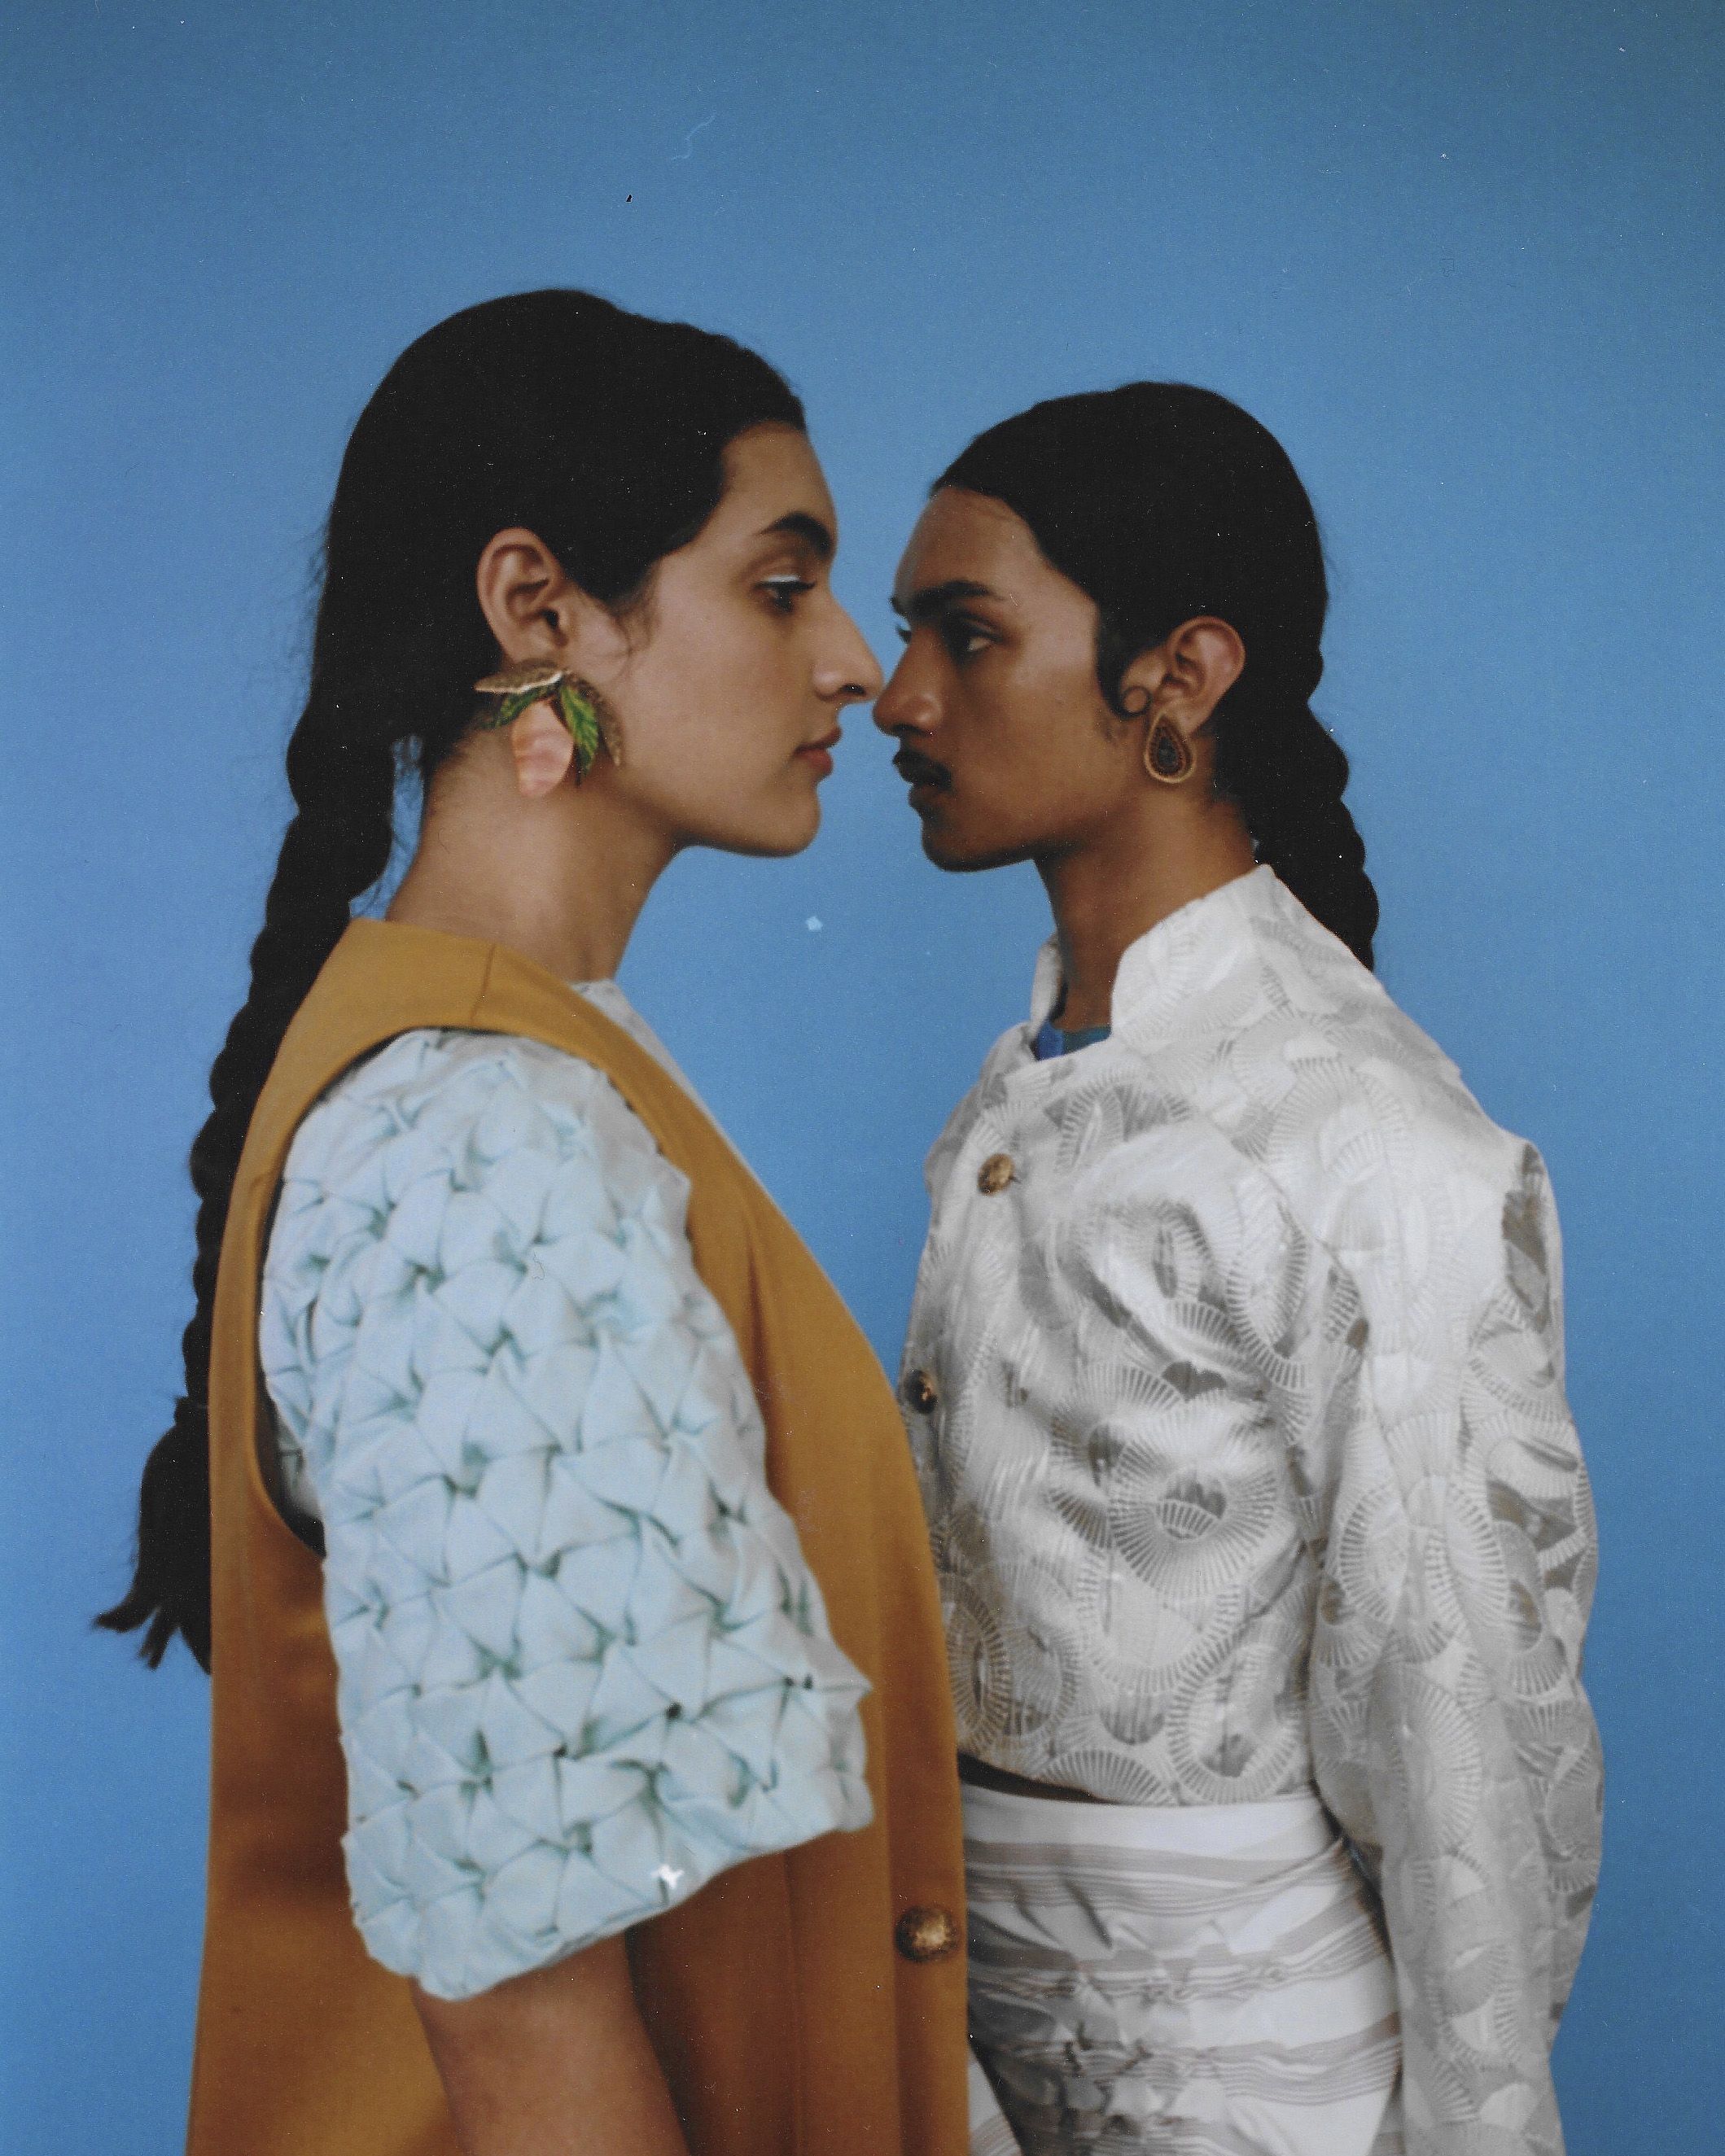 Two models standing face to face against a blue background